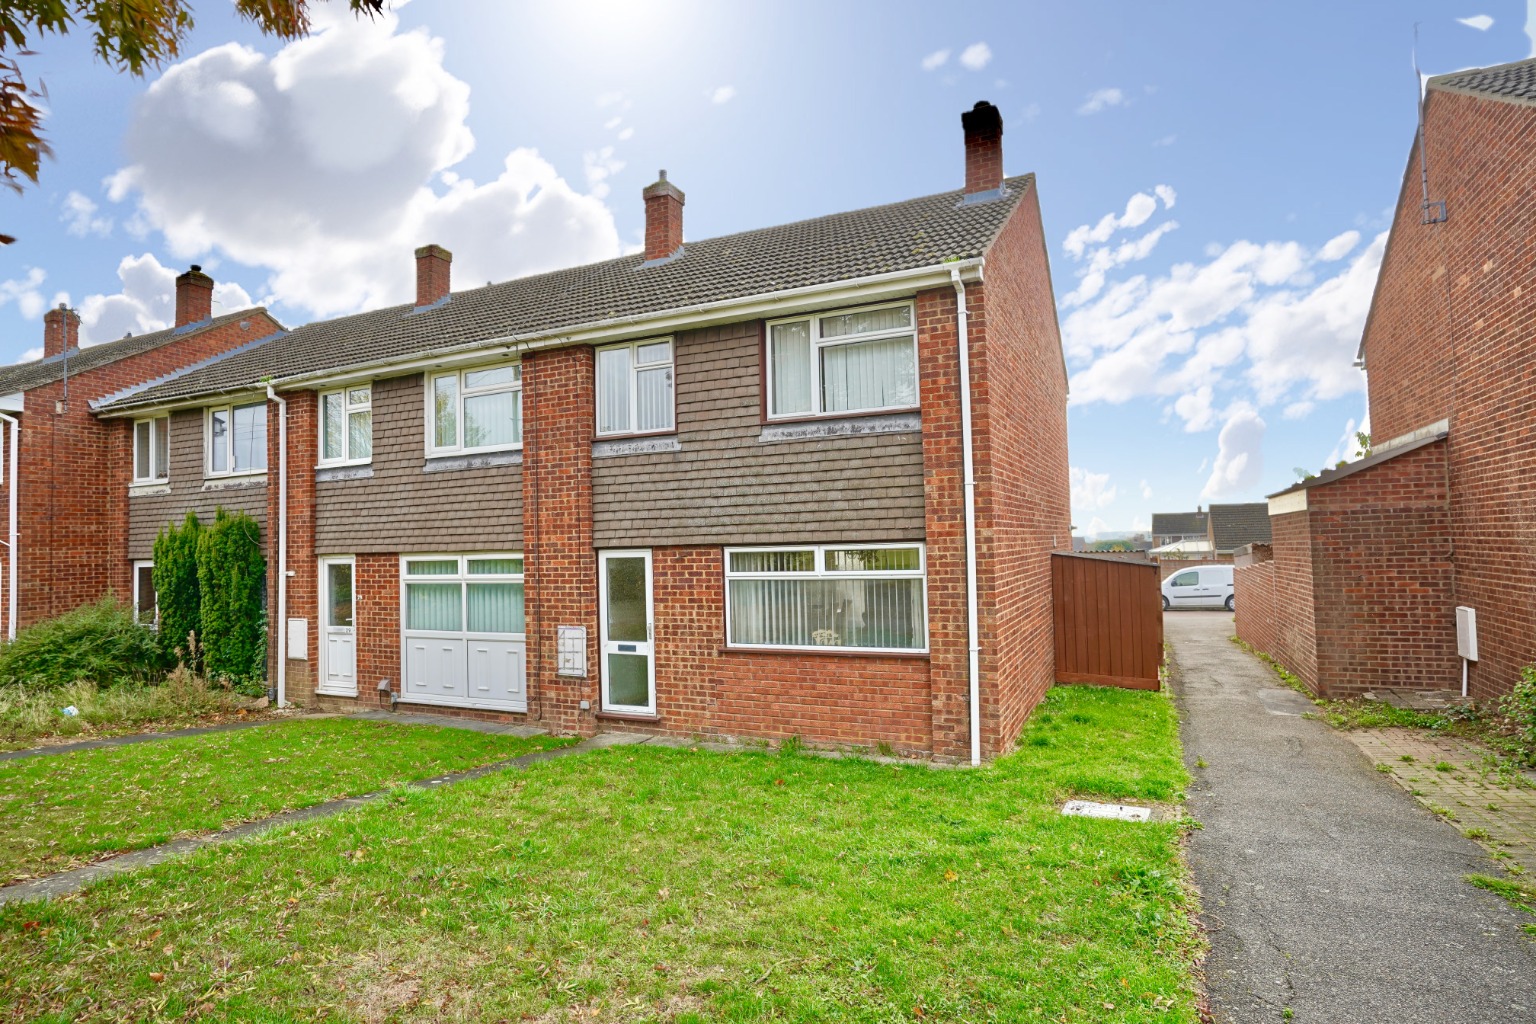 3 bed end of terrace house for sale in Prospero Way, Huntingdon 0